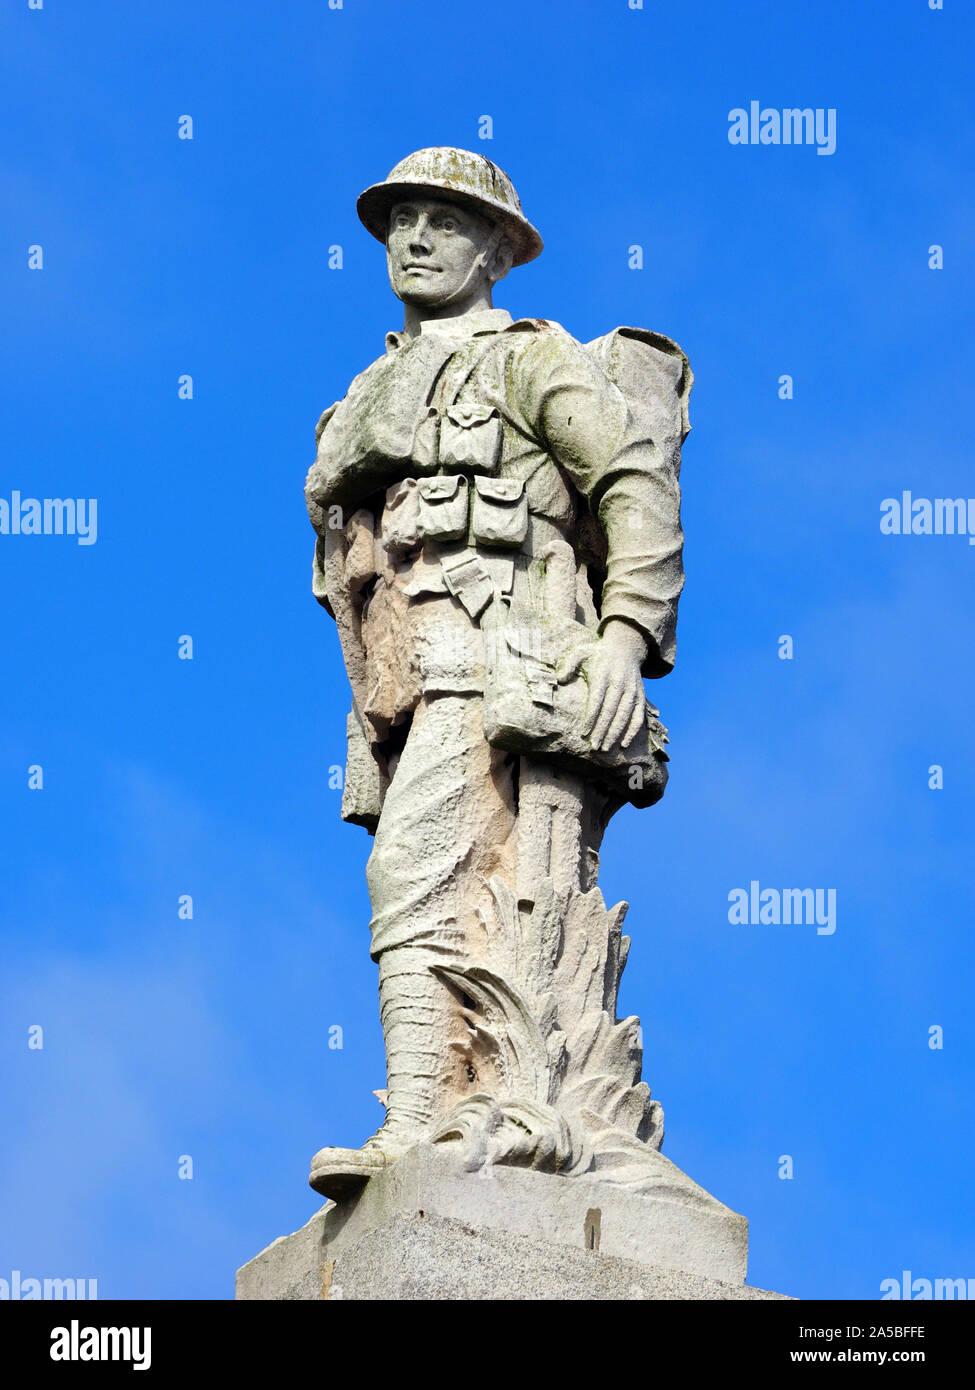 Statue of a soldier at the top of the war memorial on the seafront at Douglas, Isle of Man. U.K. Stock Photo